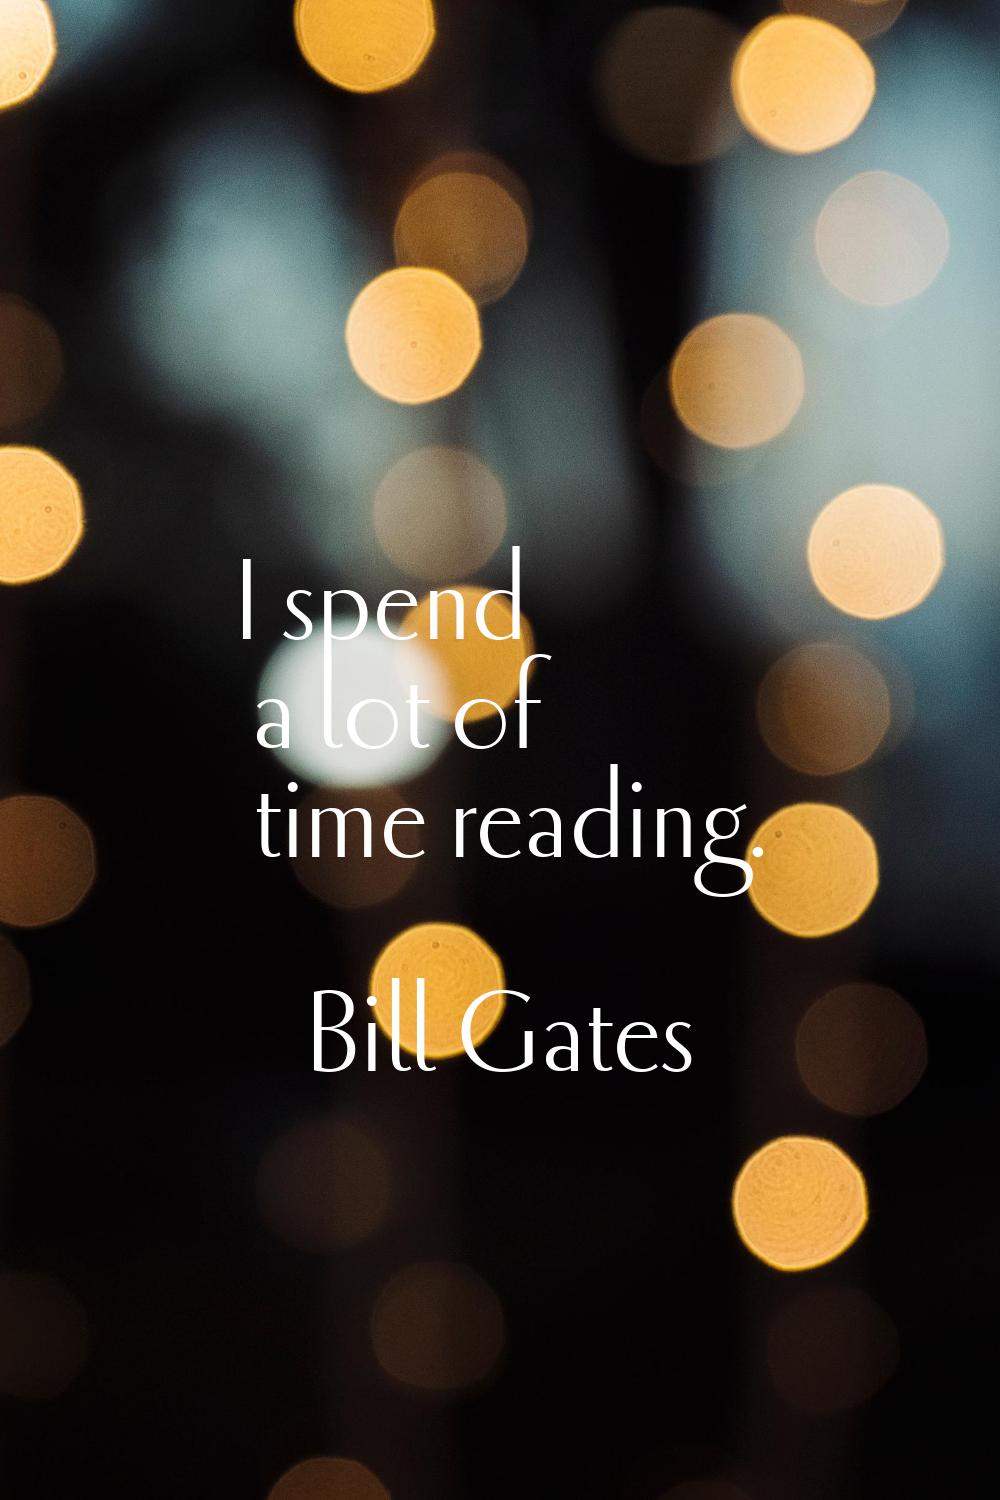 I spend a lot of time reading.